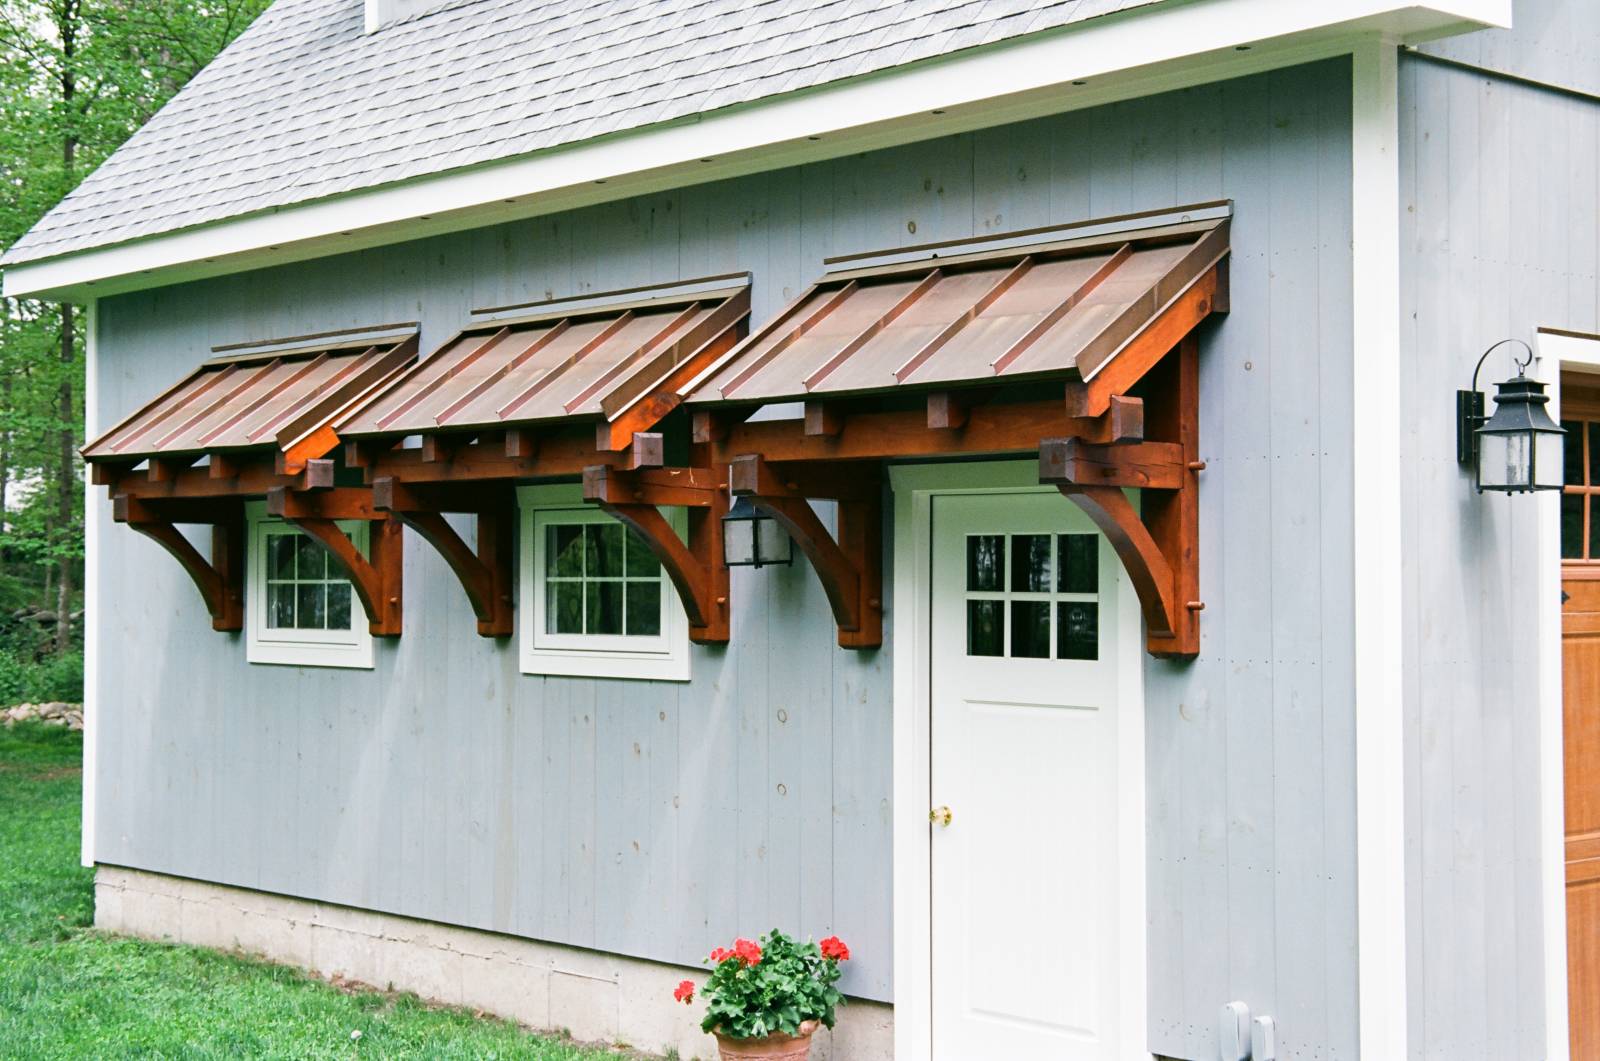 Timber frame eyebrow roofs with copper standing seam